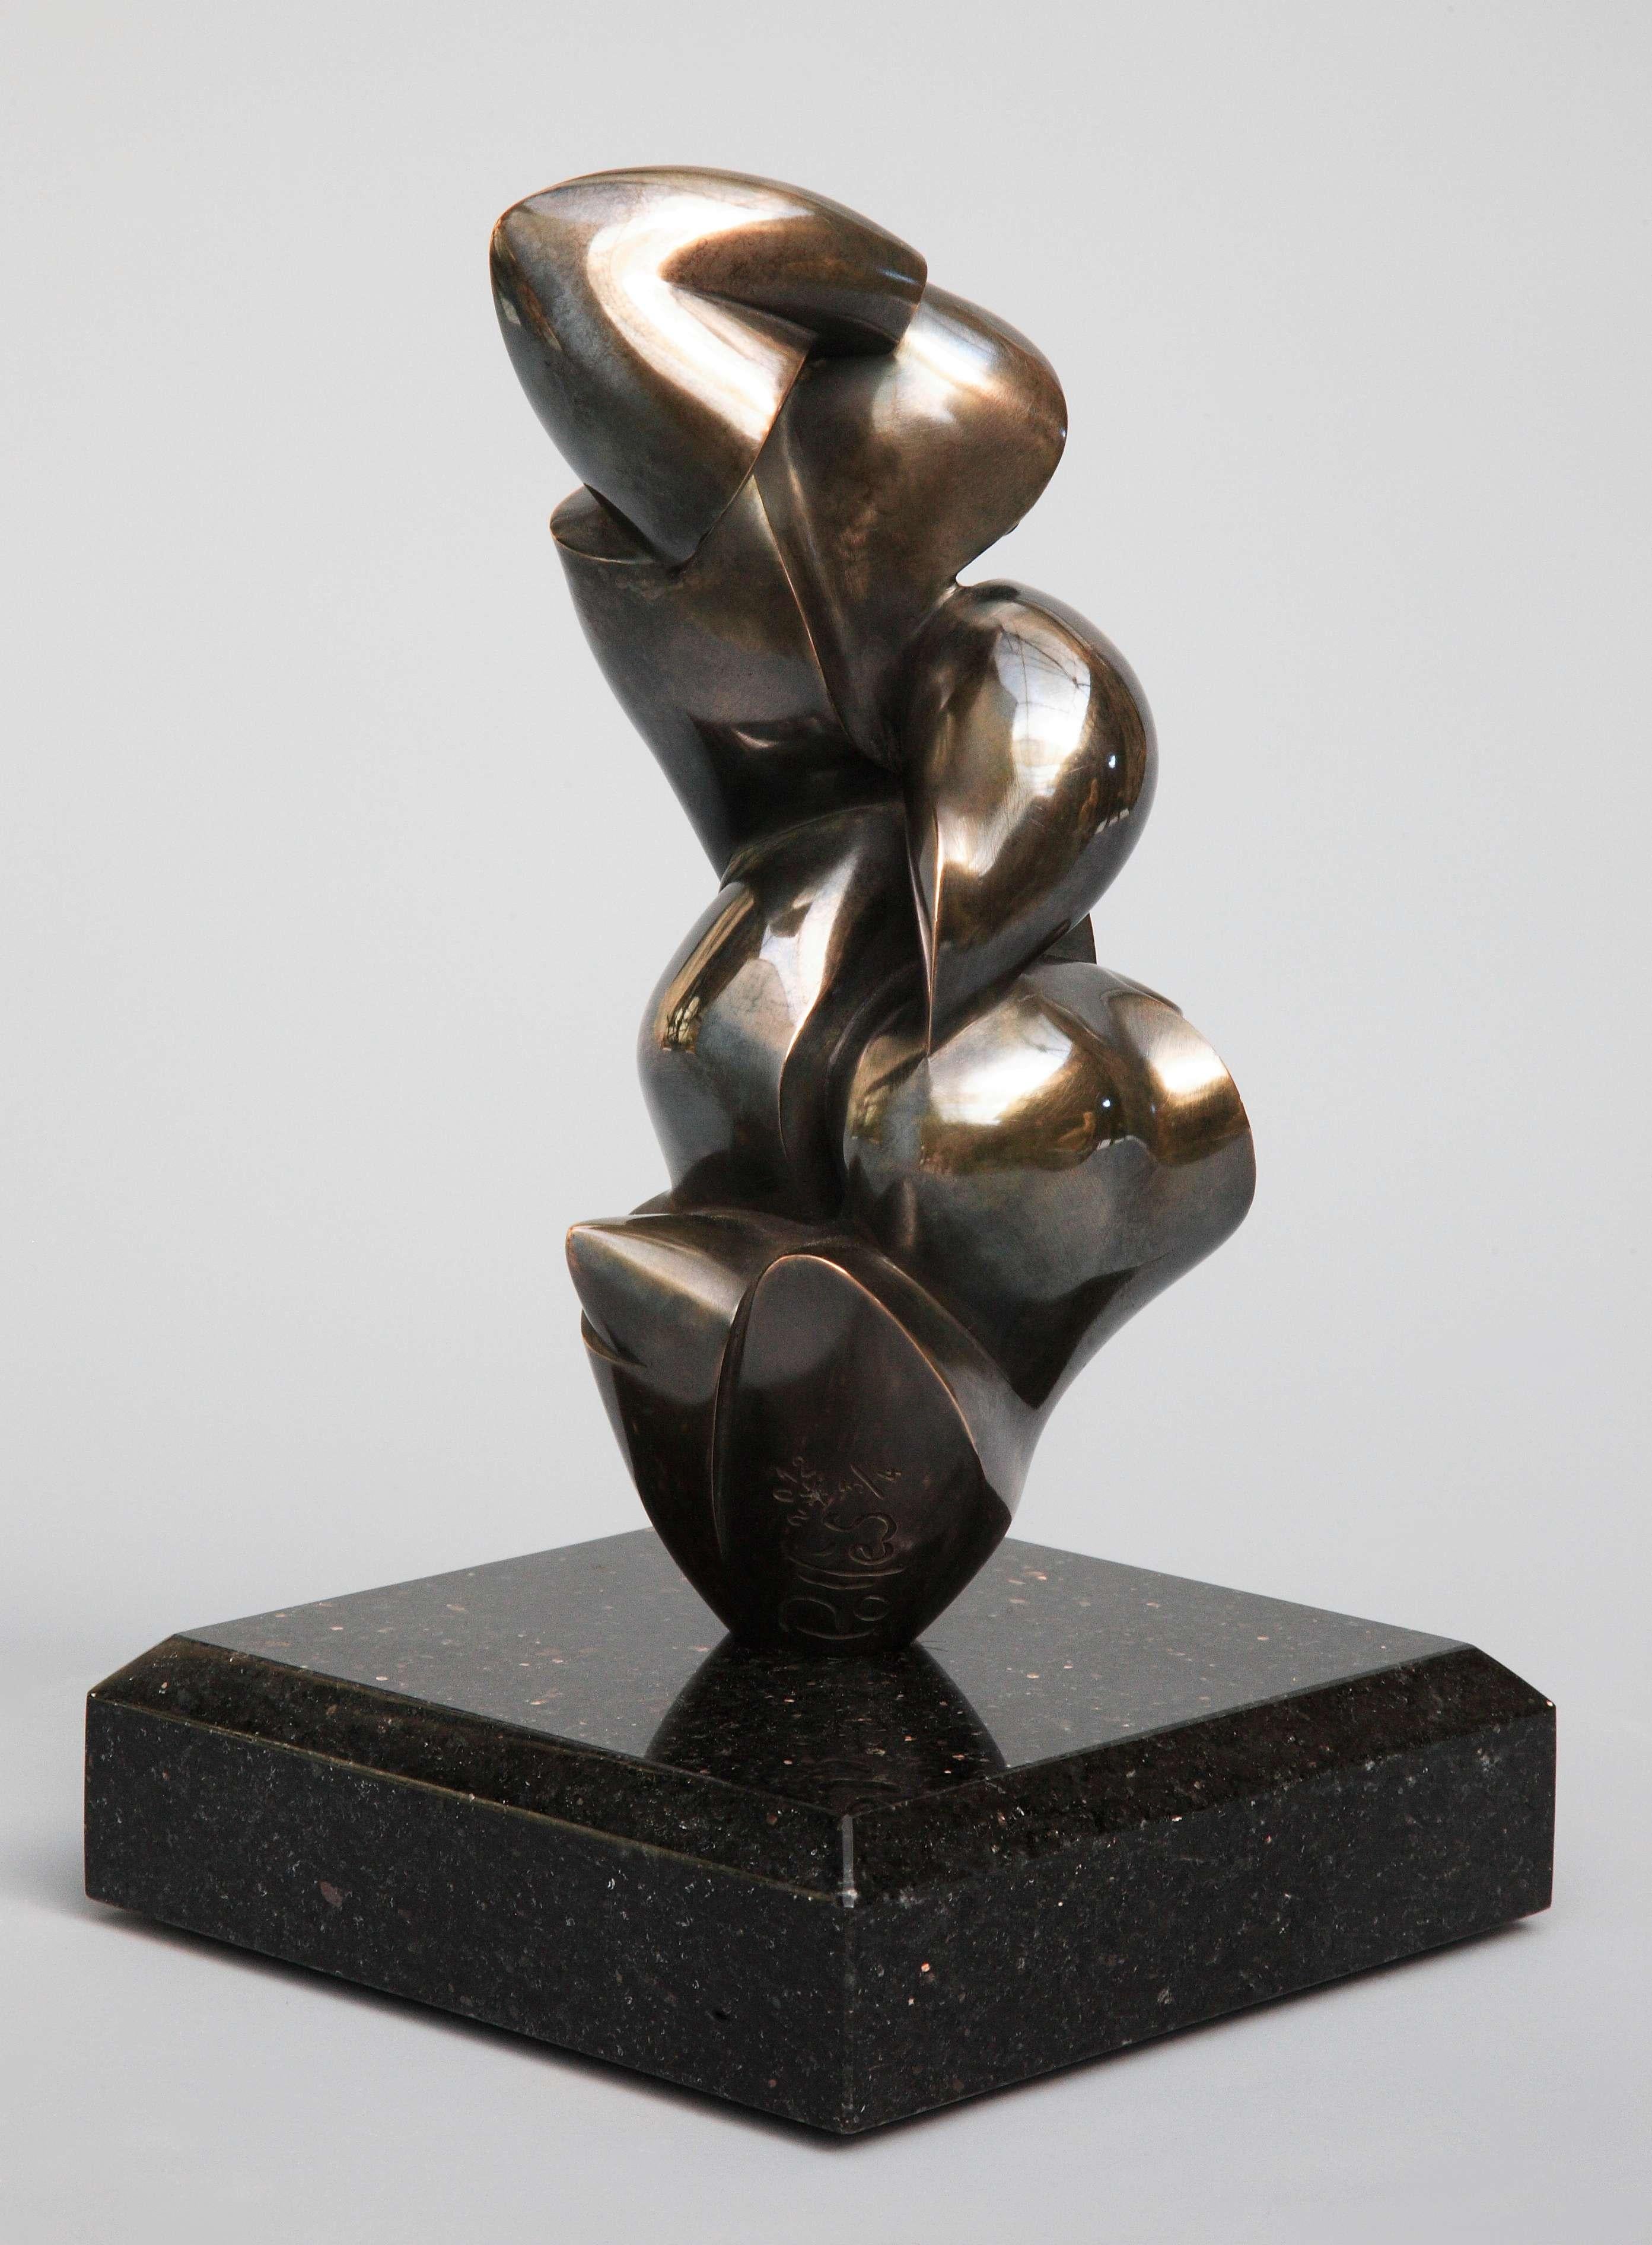 Pollès - Bronze Sculpture - Chrysolithe
Bronze
3/4
Created in 2012, casted in 2013
22 x 10 x 13 cm
Signed and Numbered

BIOGRAPHY
Pollès was born in Paris in 1945
Like Leonard de Vinci in an anatomical search of perfection, of representation of